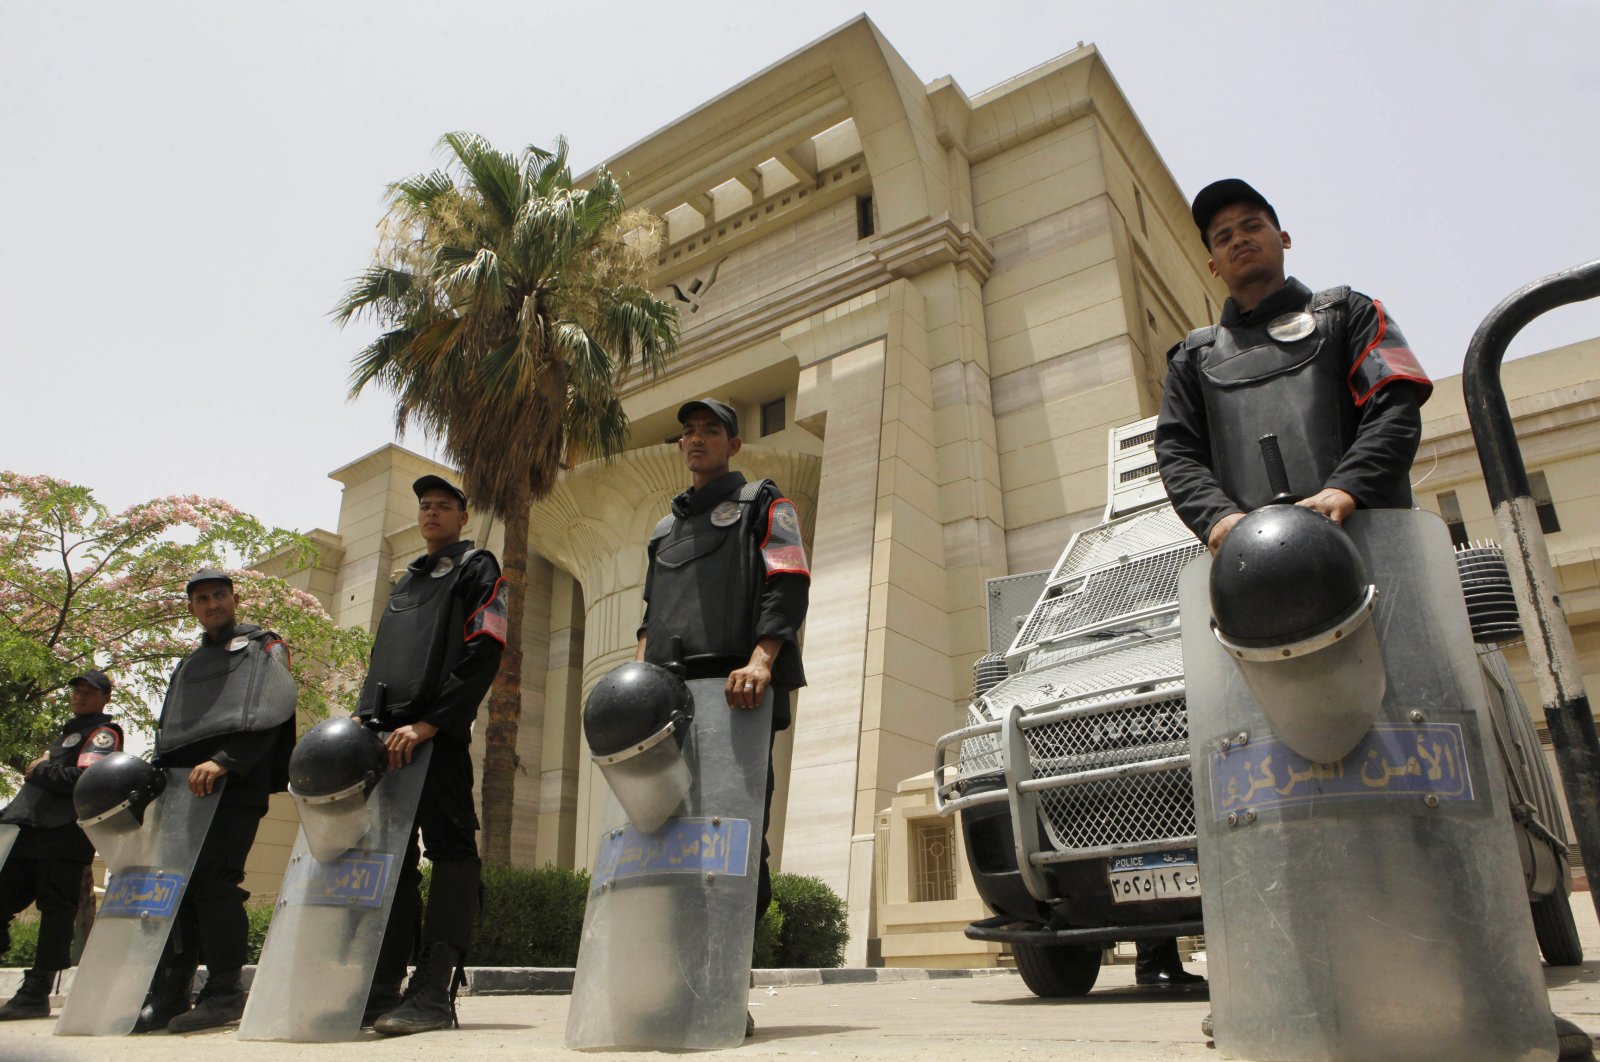 Egyptian anti-riot police stand guard in front of the Supreme Constitutional Court in Cairo, Egypt, June 2, 2013. (AP Photo)